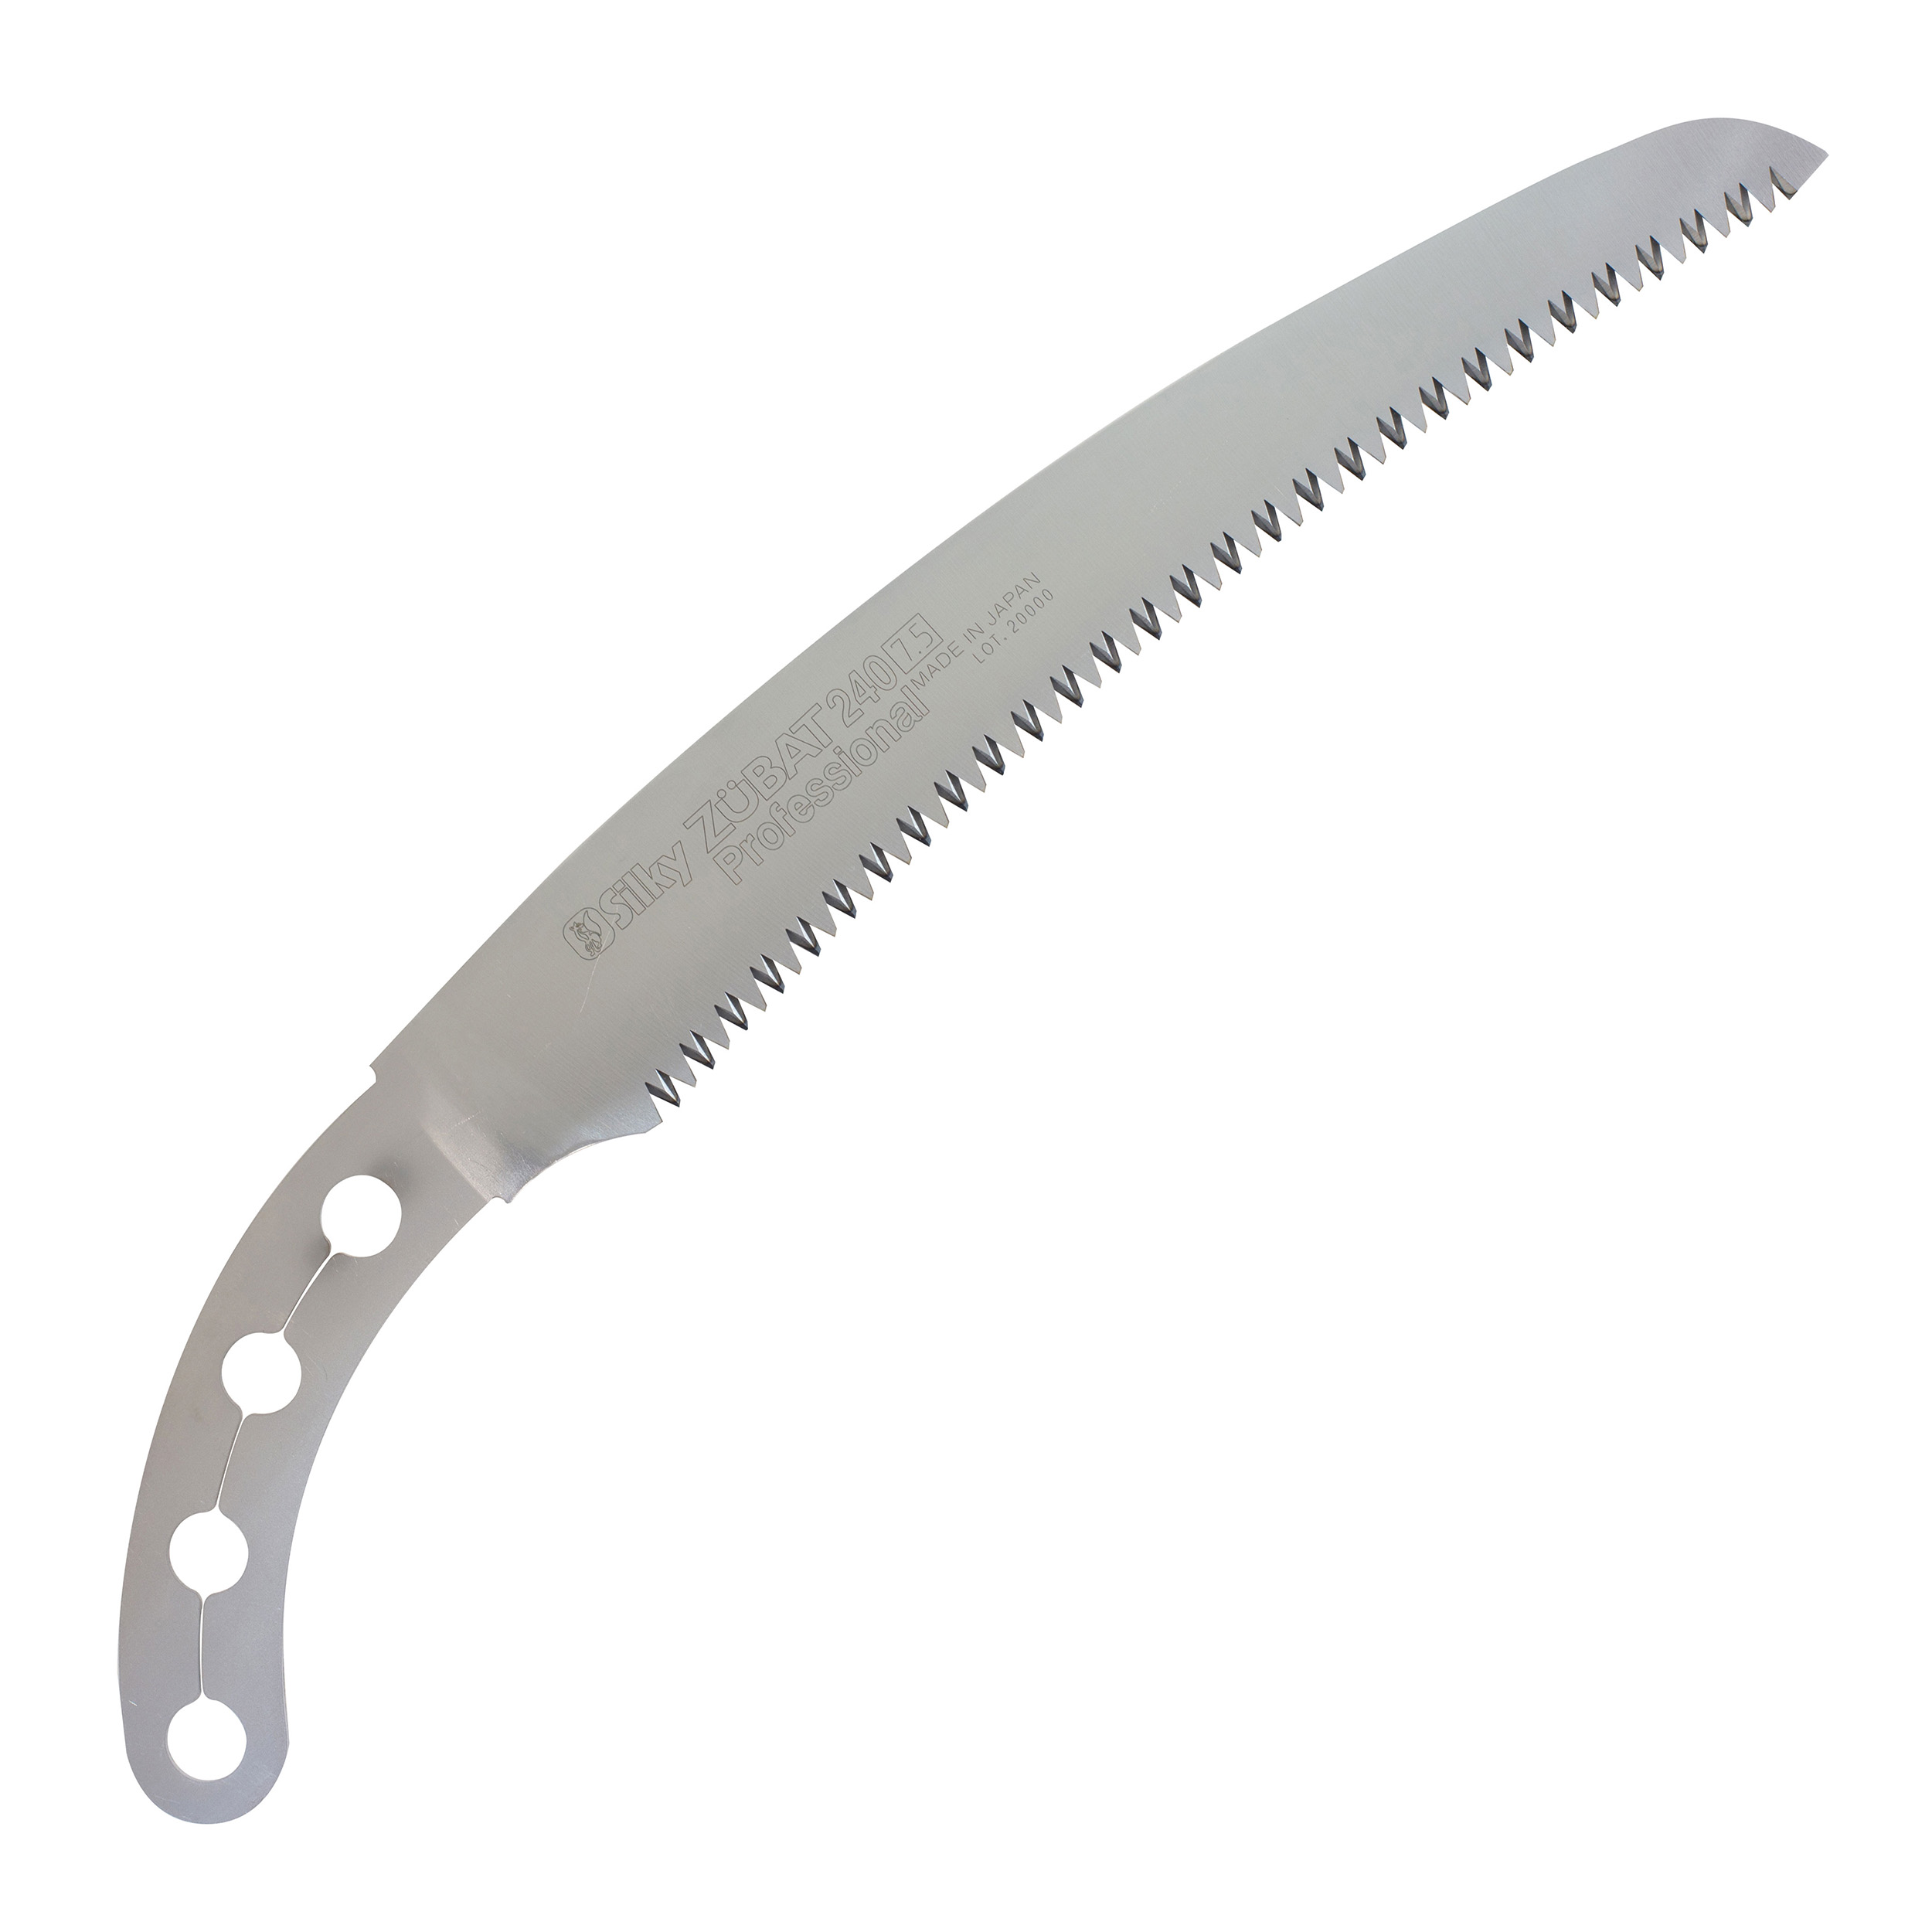 Zubat Replacement Blade, 240mm, Large Teeth